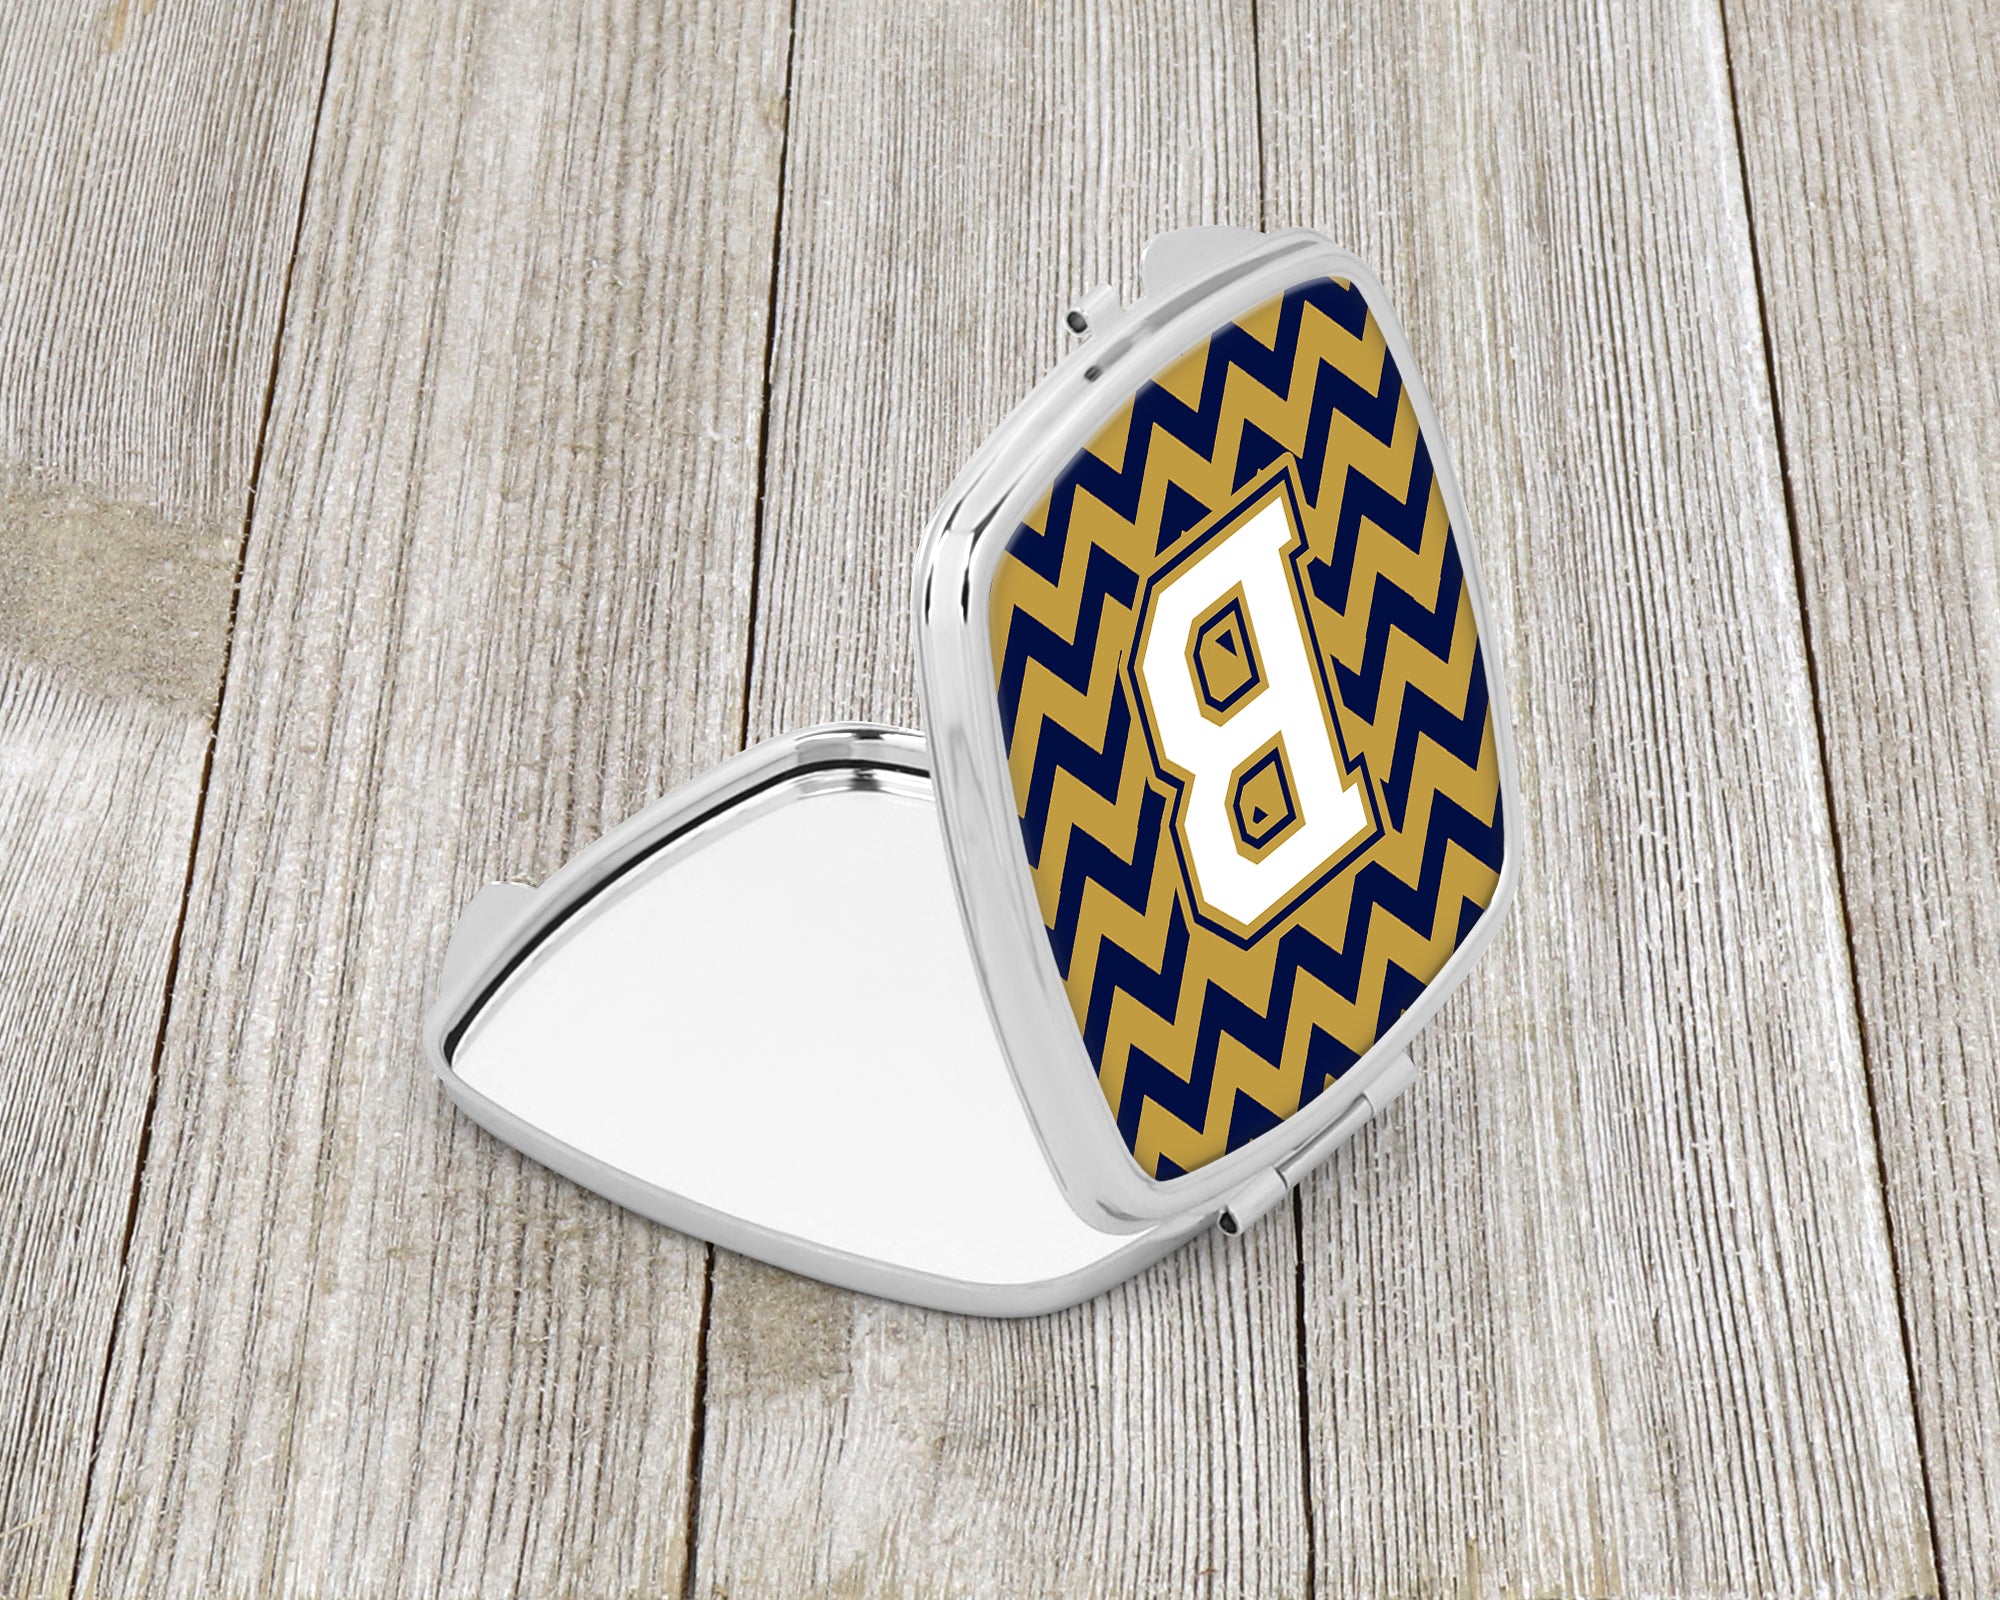 Letter B Chevron Navy Blue and Gold Compact Mirror CJ1057-BSCM  the-store.com.